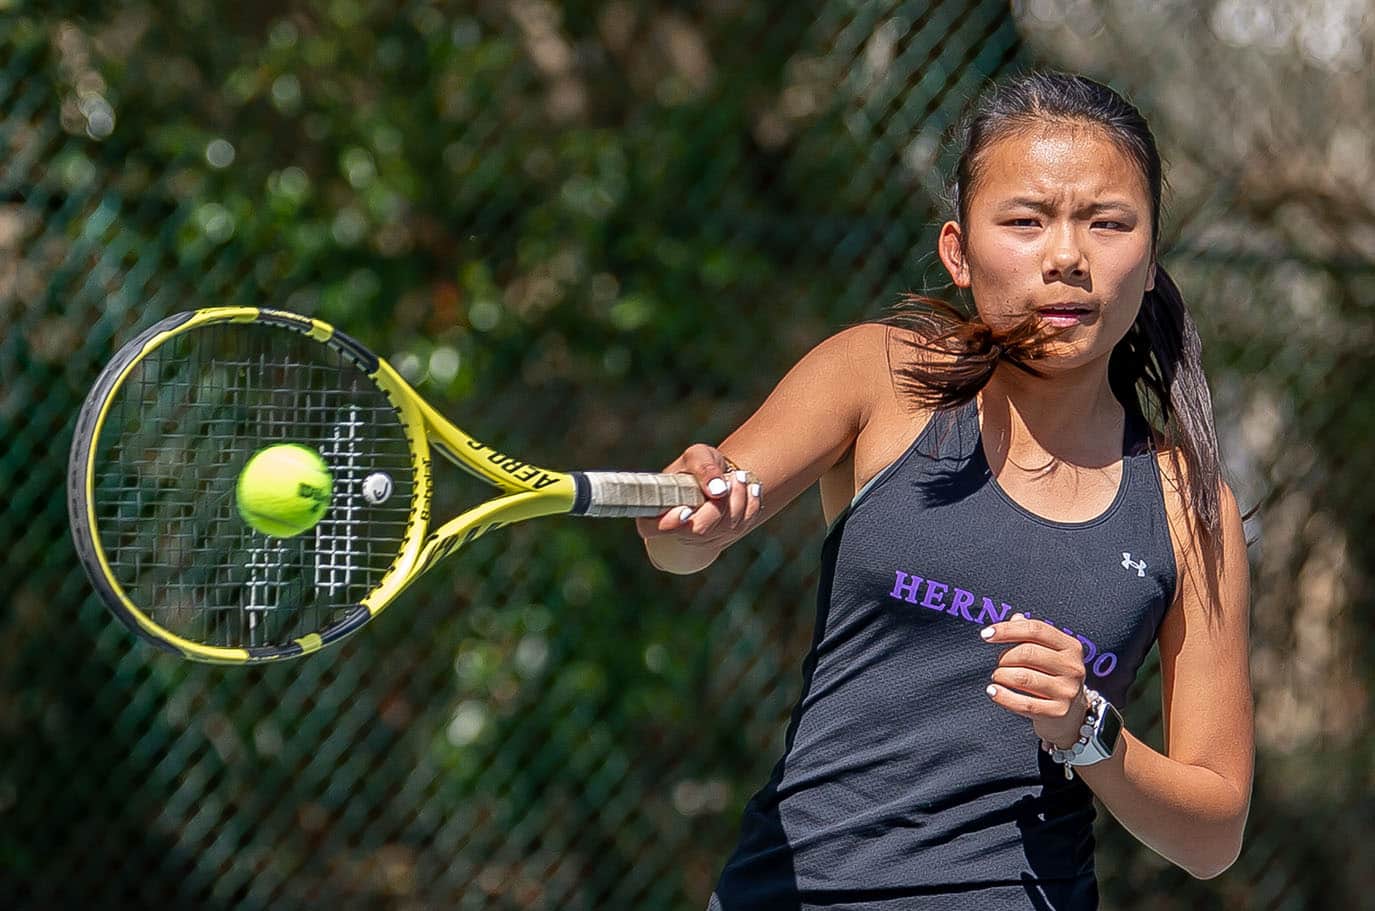 Hernando High’s Mia Liu handles a forehand return in a doubles match versus Central High at Brooksville Park Tuesday afternoon. Photo by JOE DiCRISTOFALO